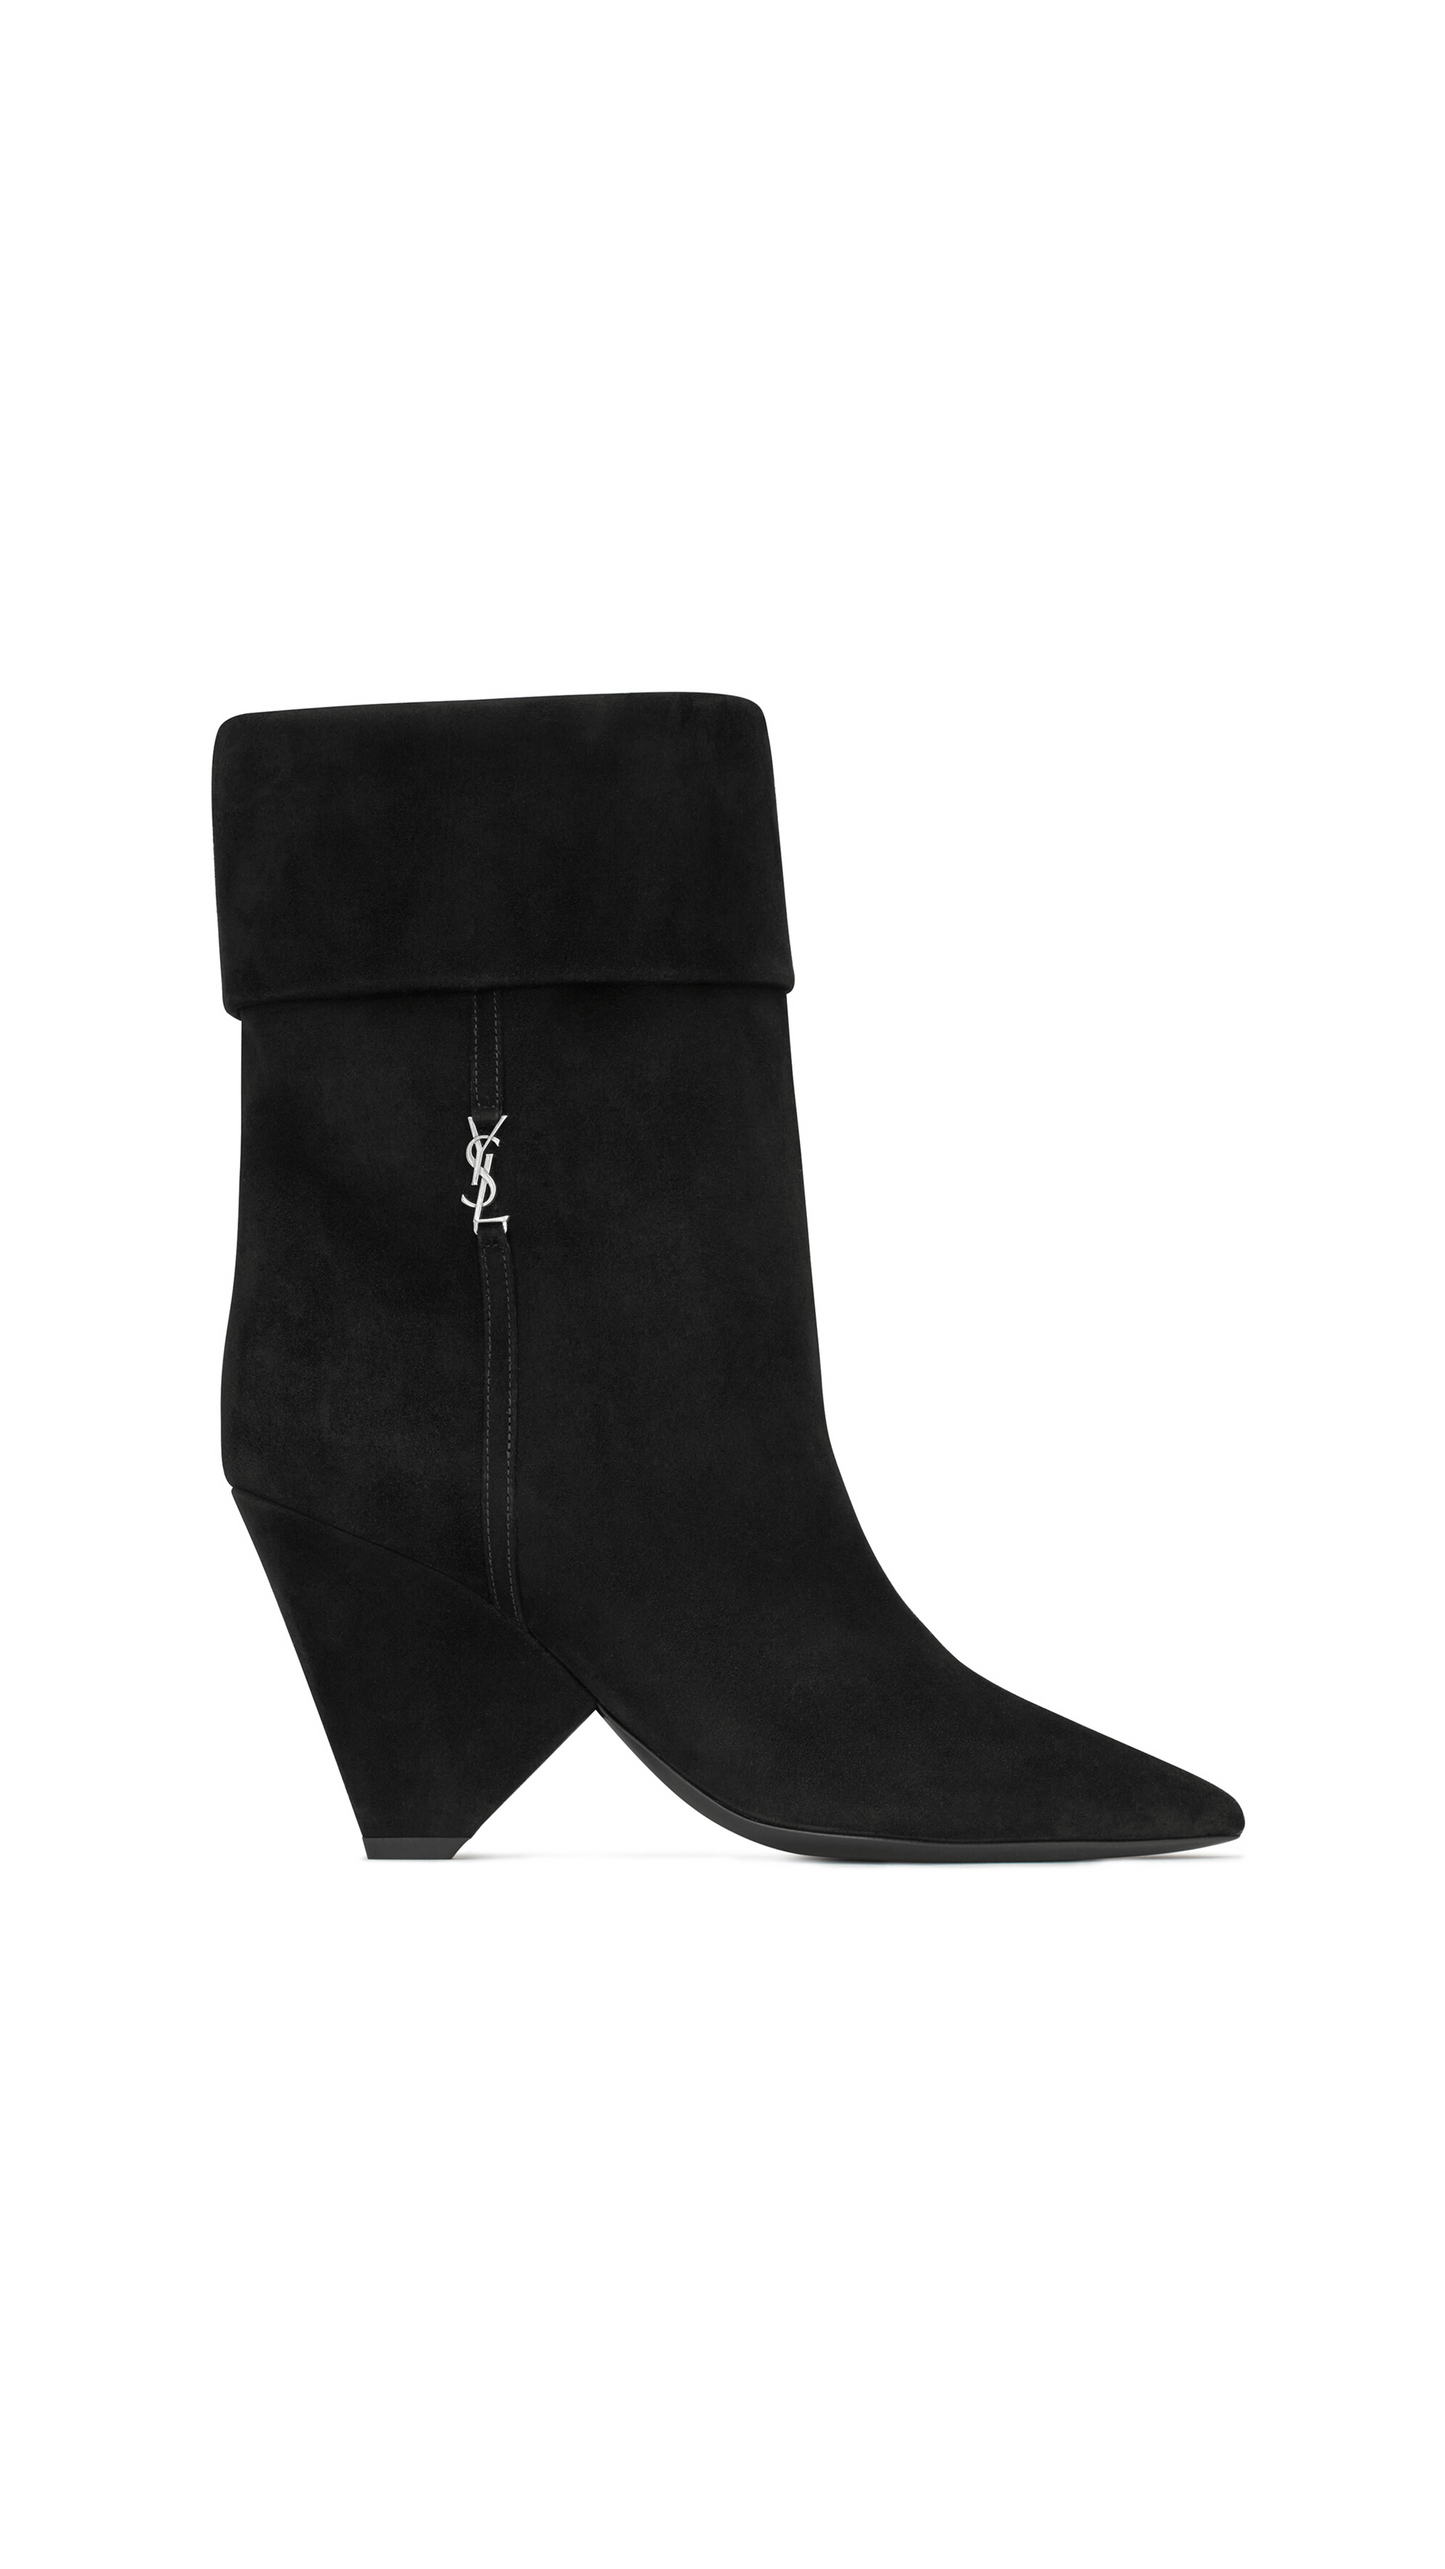 Niki Boots in Suede and Silver-tone Monogram - Black